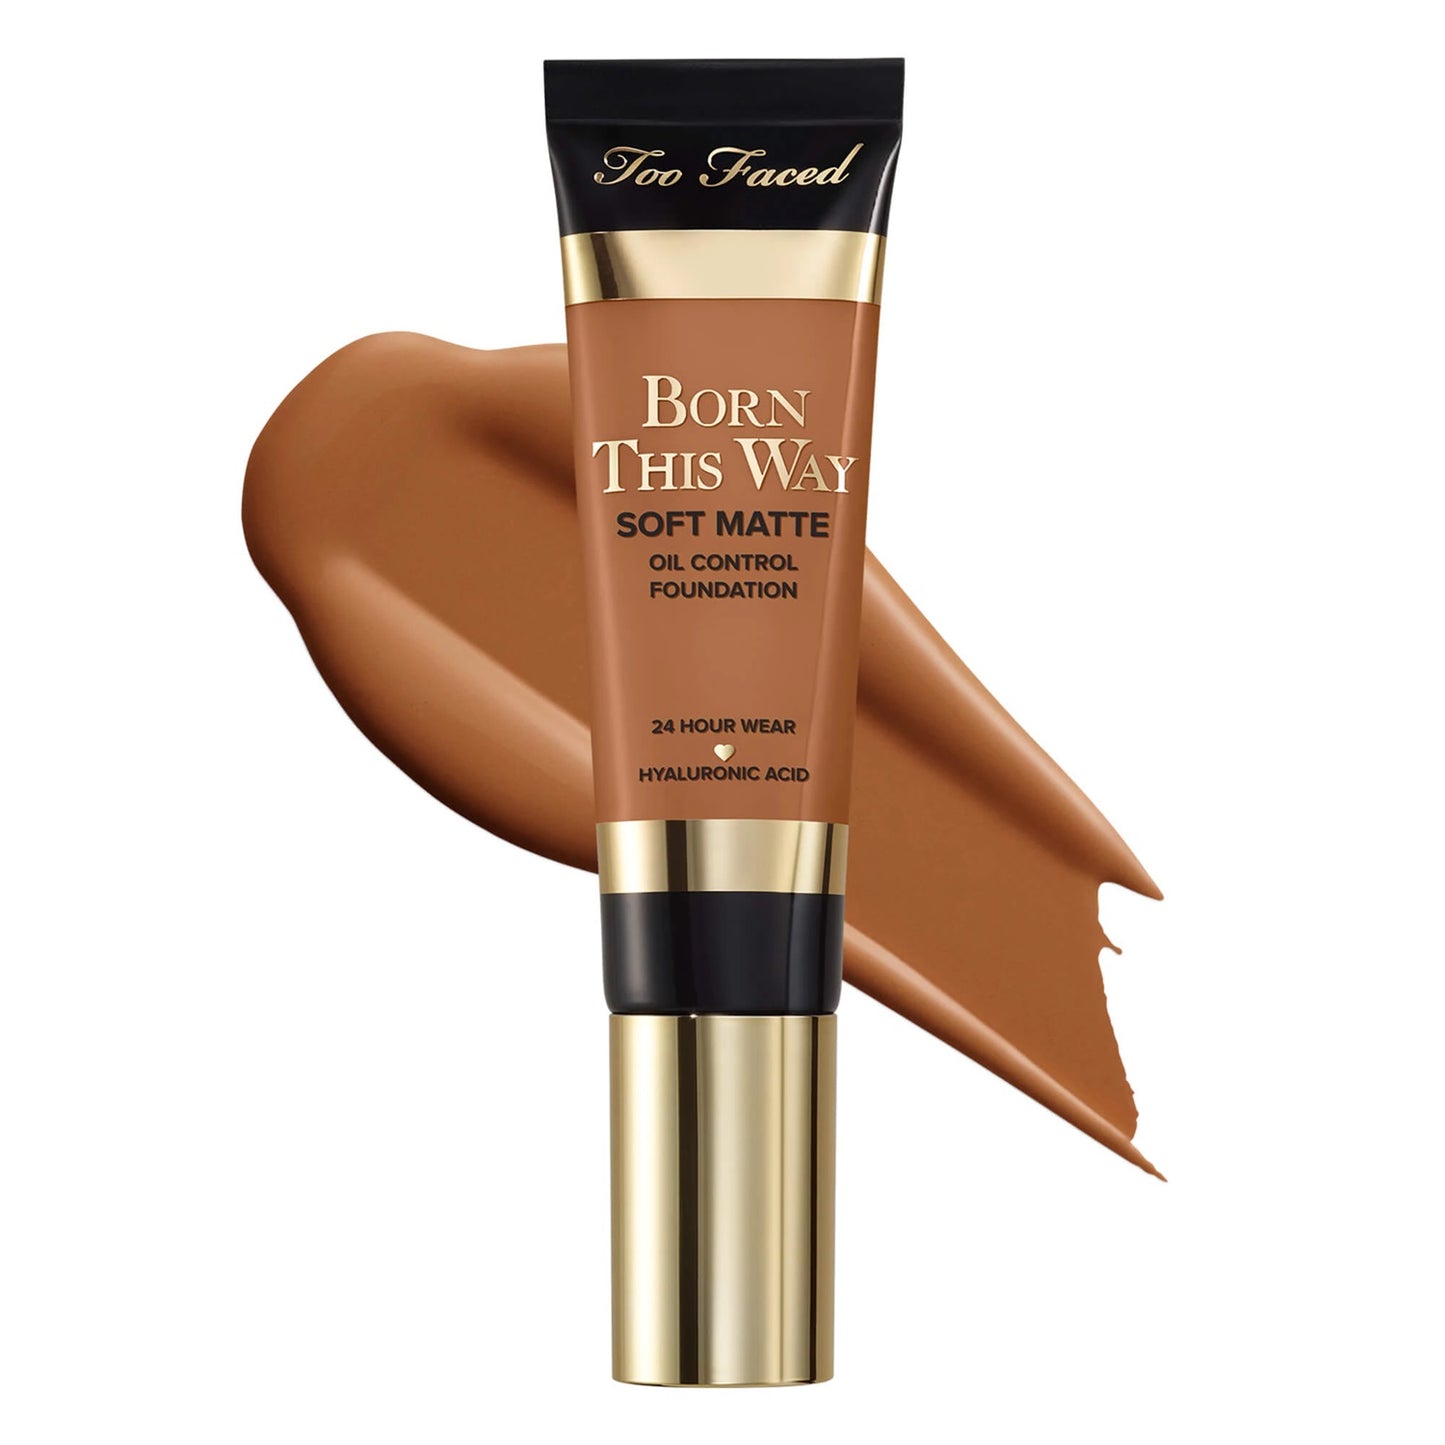 Too Faced Born This Way Soft Matte Foundation 30ml - Caramel